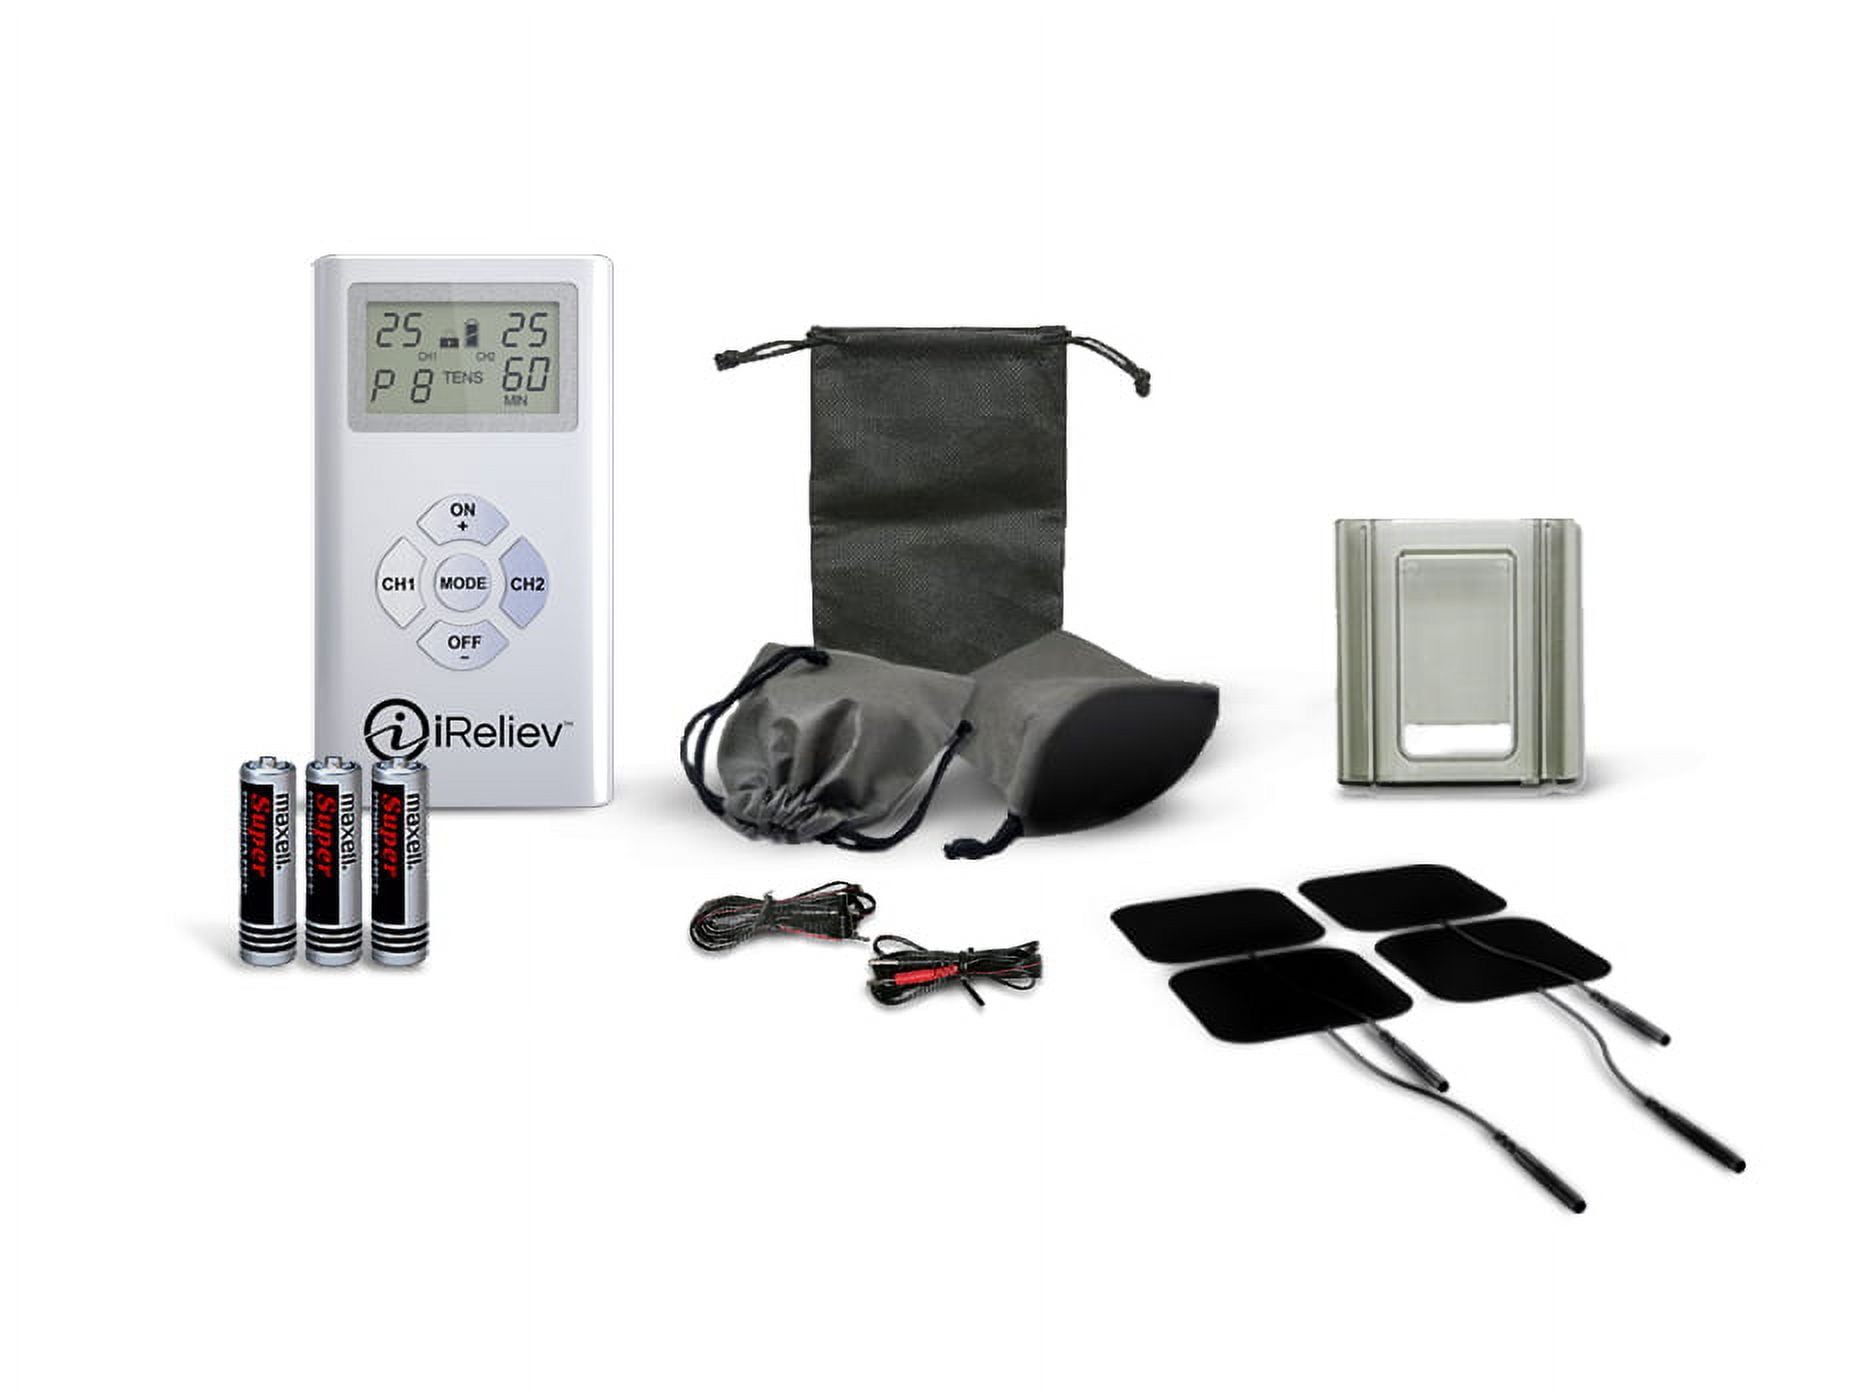 TENS Unit - Dual Channel Electro Therapy Pain Relief System from iReliev 